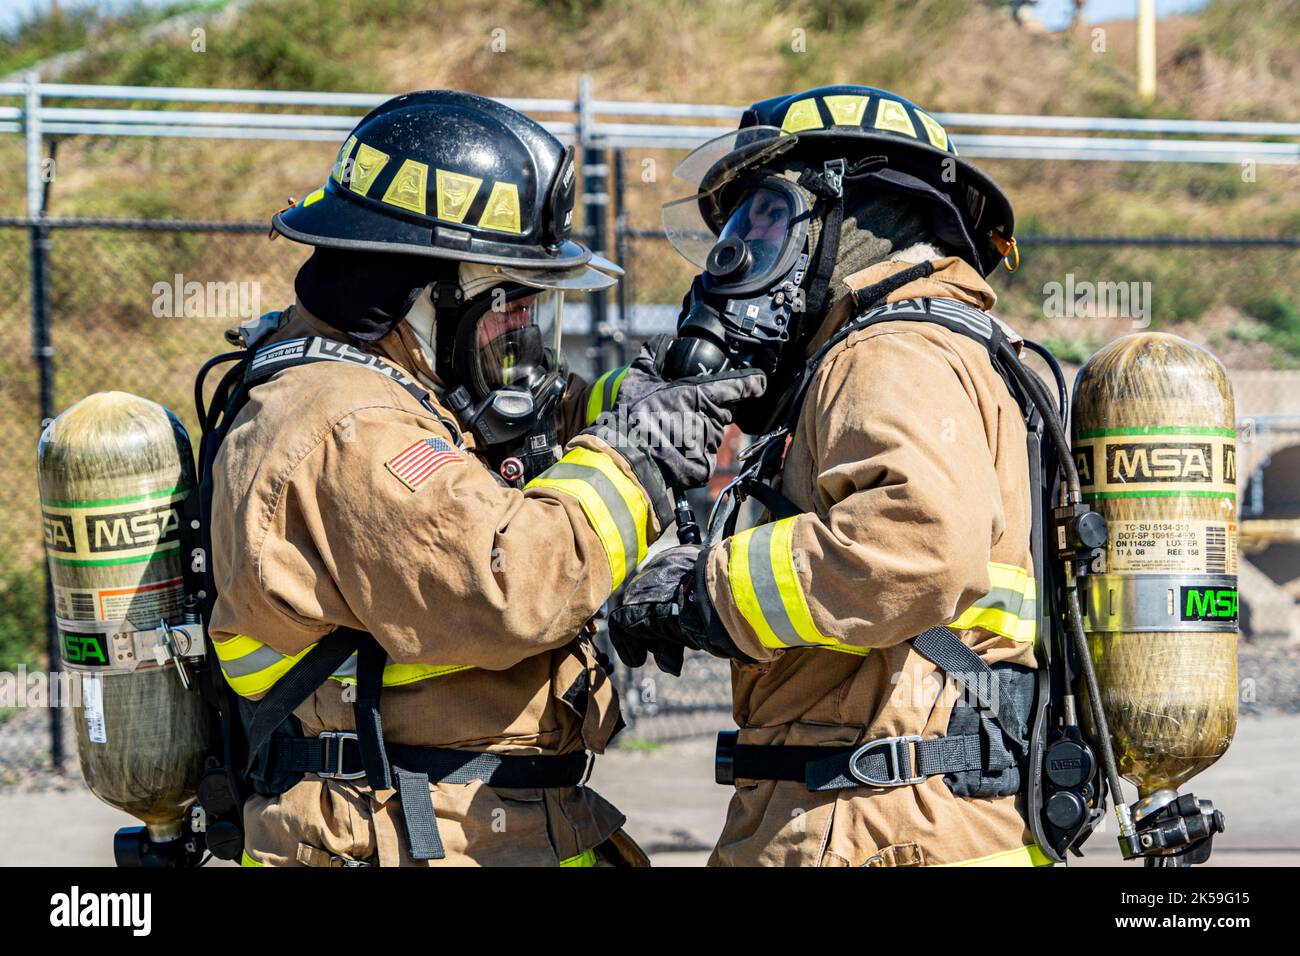 Firefighters John Russum and Tad Fragale with the 914th Fire Emergency Services do a quality check of each other's protective gear before putting out an interior structure fire within a simulated Boeing 737 crash at a training facility in Rochester, New York, August 24, 2022. Ensuring protective equipment is in good shape prior to putting out fires is essential to protect firefighters from potentially fatal flames and gasses. (U.S. Air Force Photo by Airman Kylar Vermeulen) Stock Photo